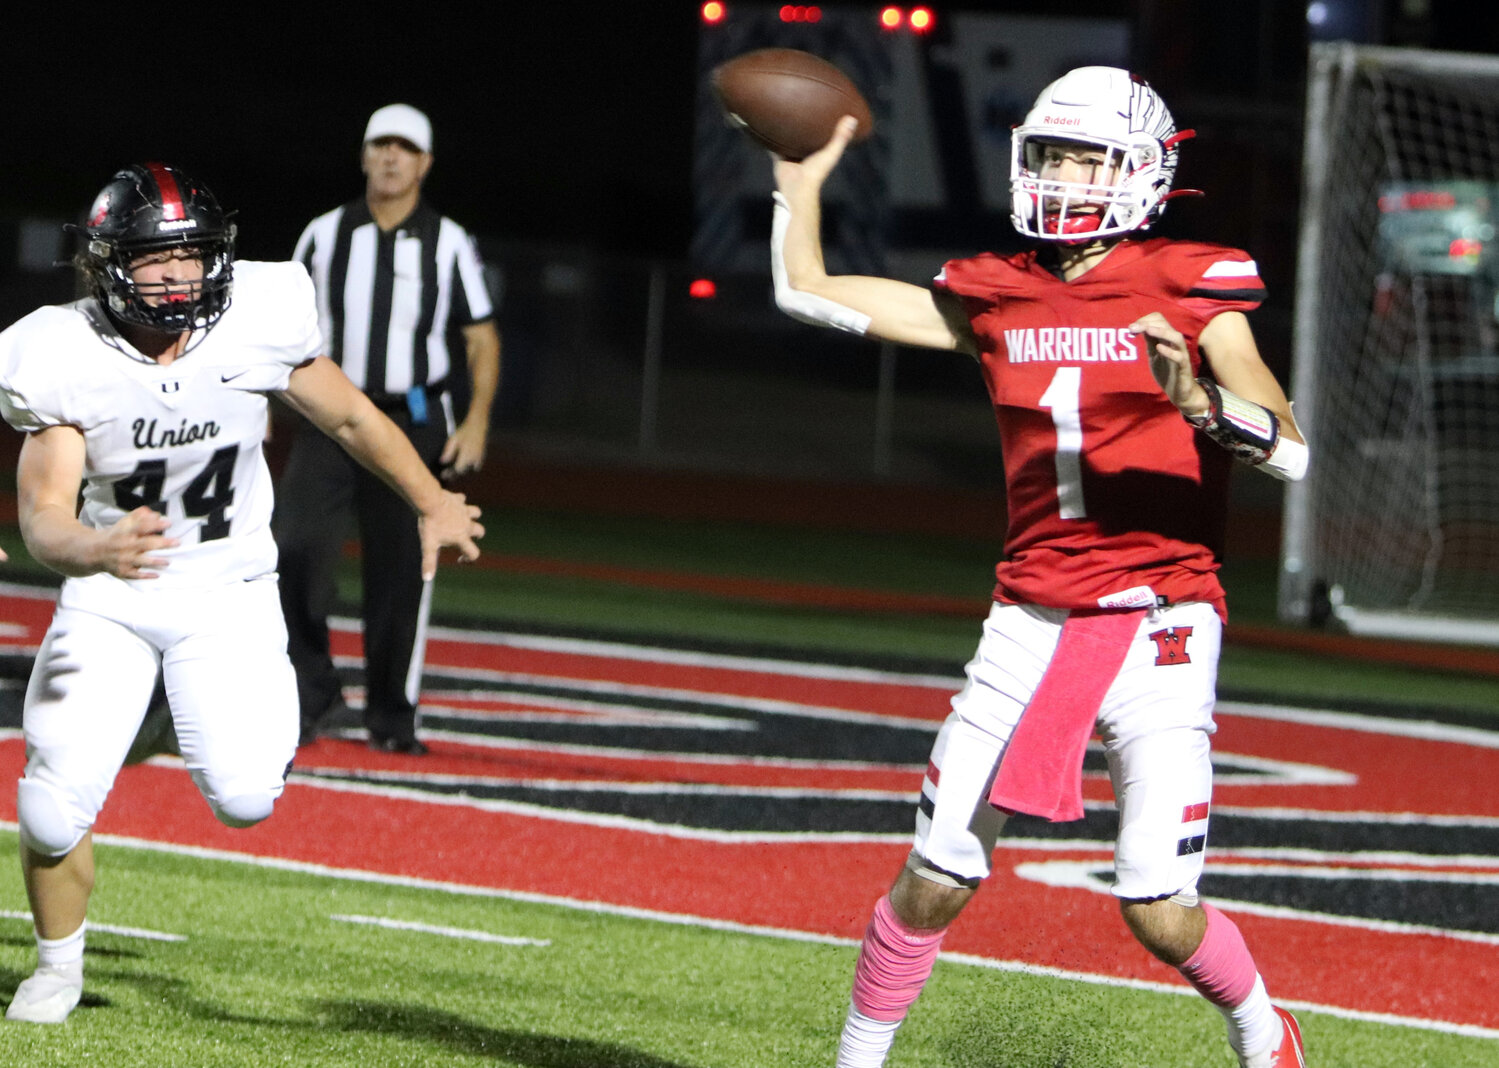 Charlie Blondin throws a pass during Warrenton's 49-21 win over Union.